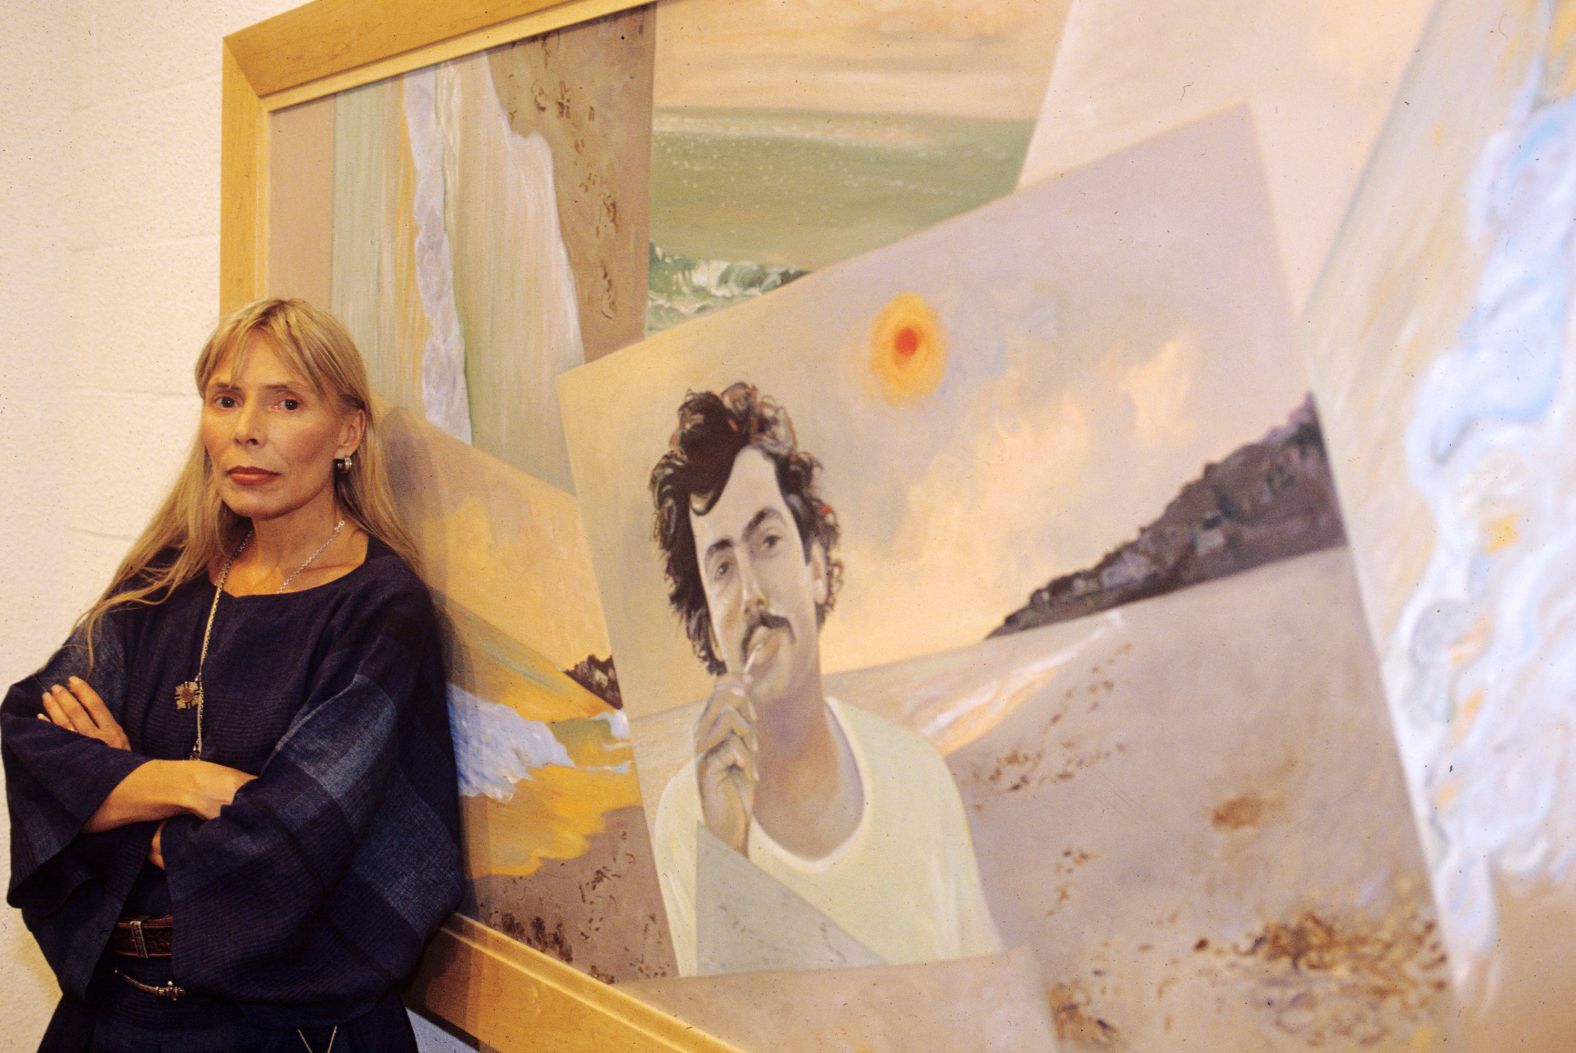 Mitchell stands in front of her painting "Malibu Fire," featuring her husband Larry Klein, at a 1990 London exhibition. Mitchell and Klein married in 1982 and divorced in 1994.